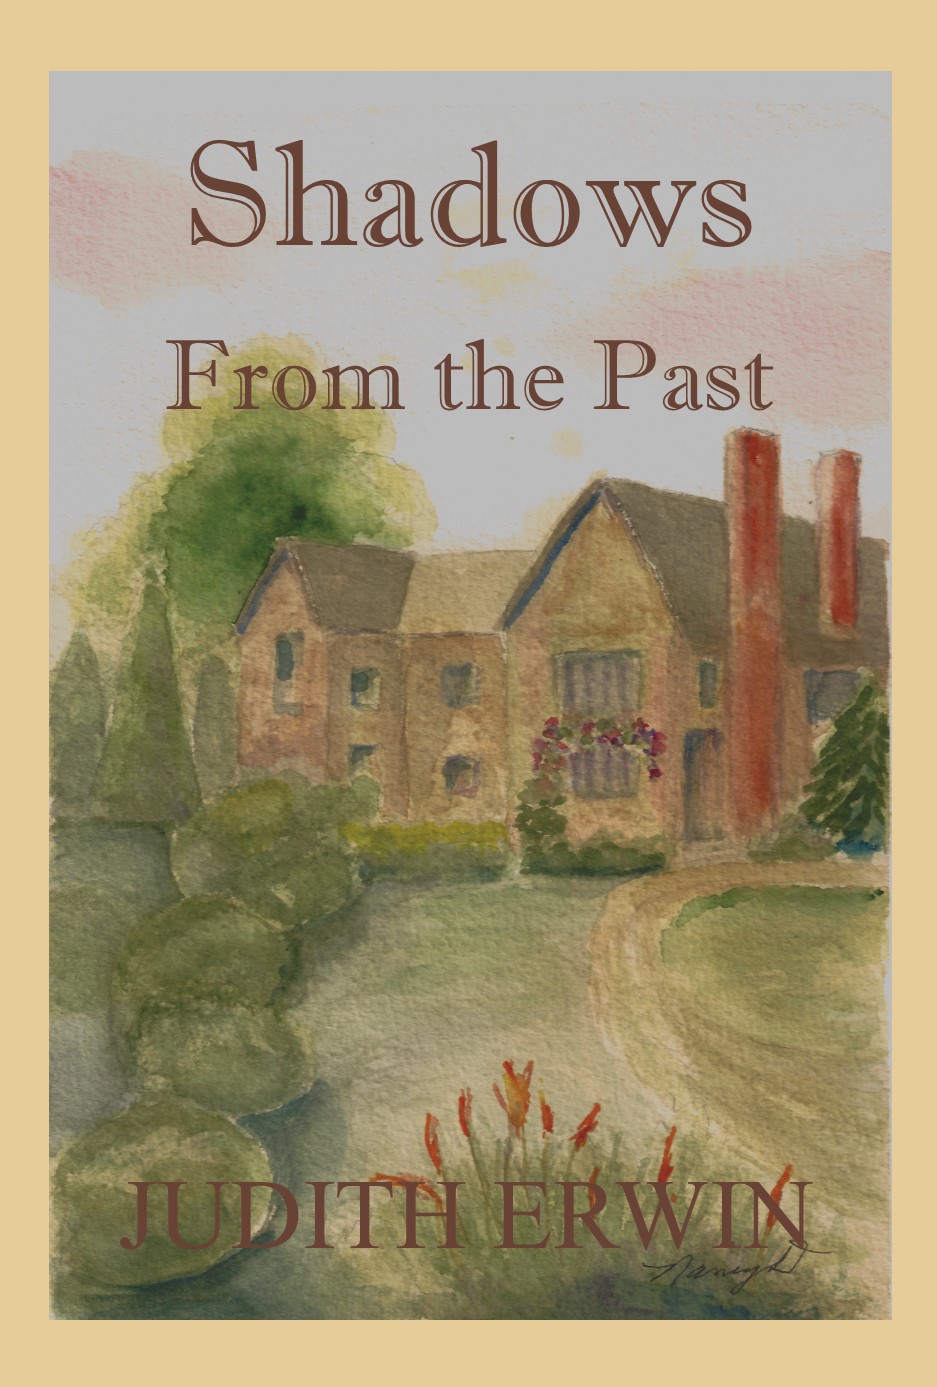 Cover art for author Judith Erwin's novel, "Shadows from the Past"